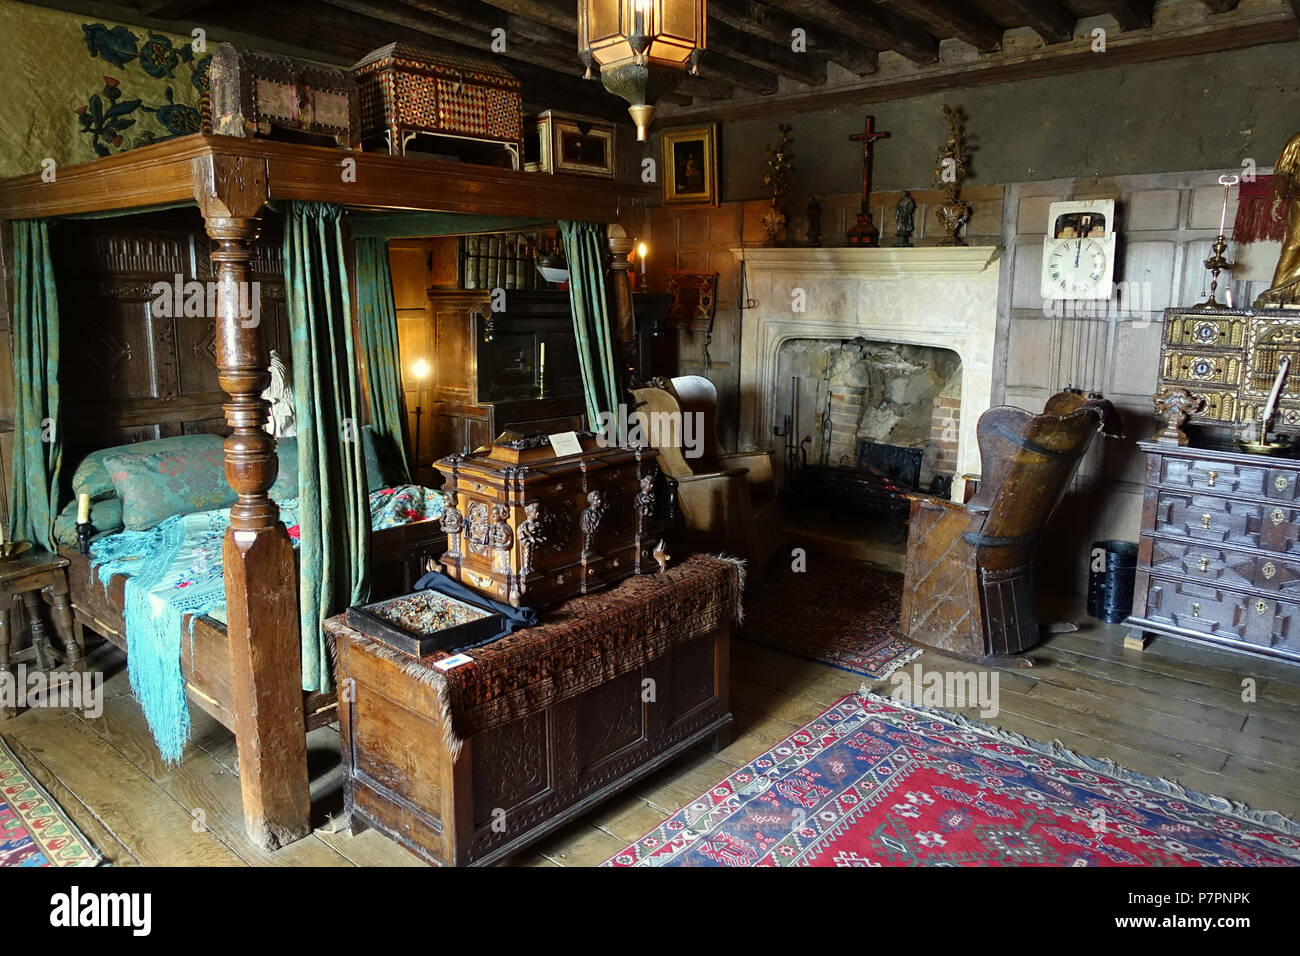 English: Interior view of Snowshill Manor - Gloucestershire, England. All items in this photograph are old enough to be in the . 23 May 2016, 08:28:54 40 Bedroom - Snowshill Manor - Gloucestershire, England - DSC09582 Stock Photo